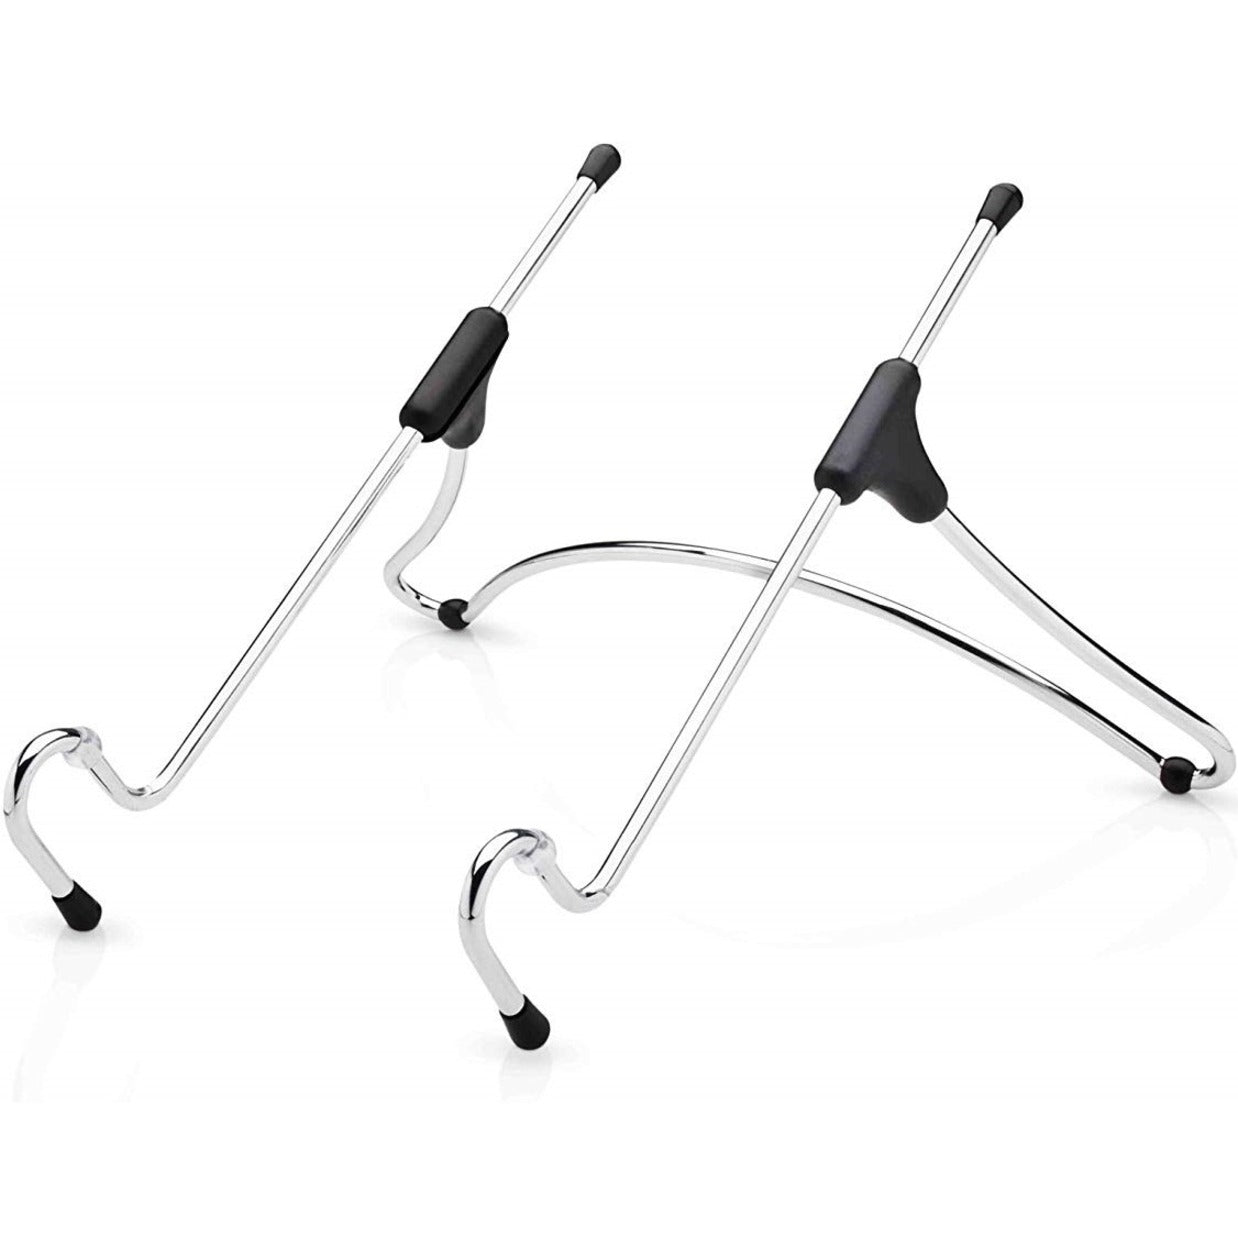 Octoo UP-02 Uptable Adjustable and Ergonomic Laptop Stand, Chrome - Sturdy, Ventilated, Foldable, Adjustable Angle